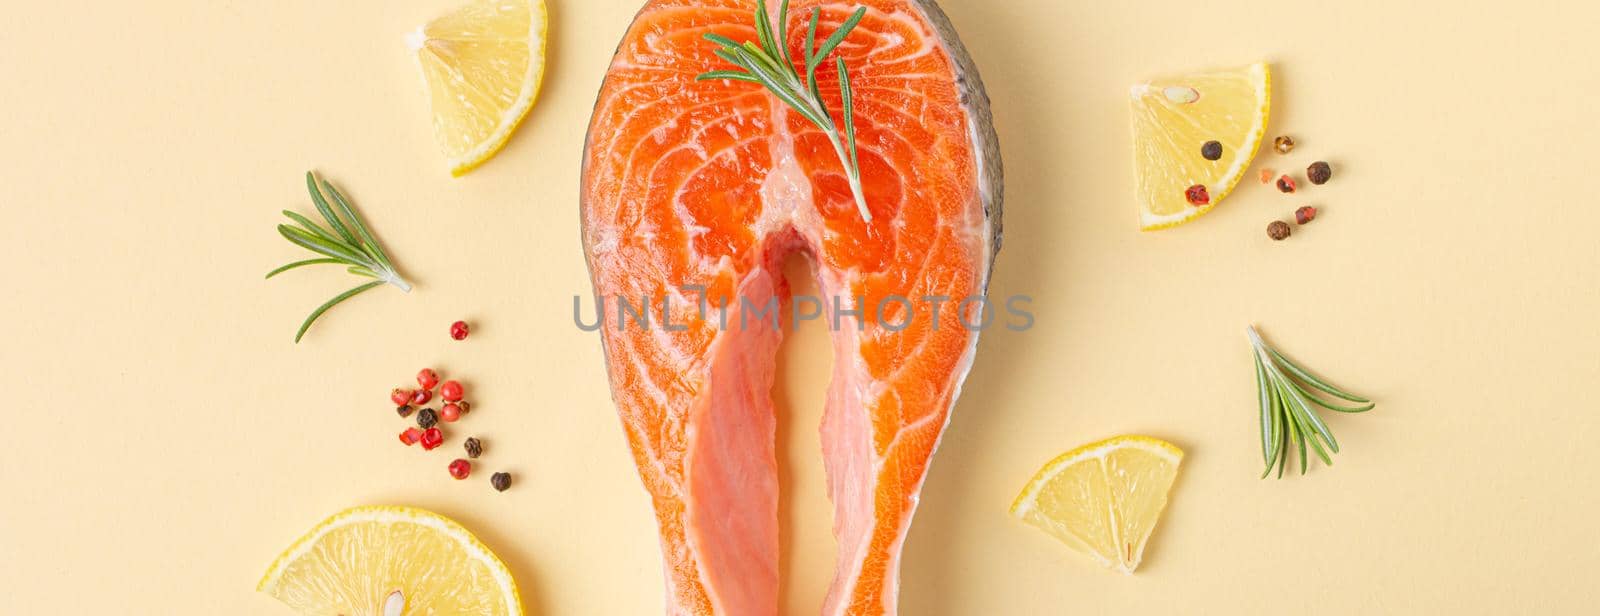 Uncooked raw fresh fish salmon steak top view on beige pastel background with rosemary, lemon wedges and spices, delicacy healthy fish cooking and nutrition concept flat lay